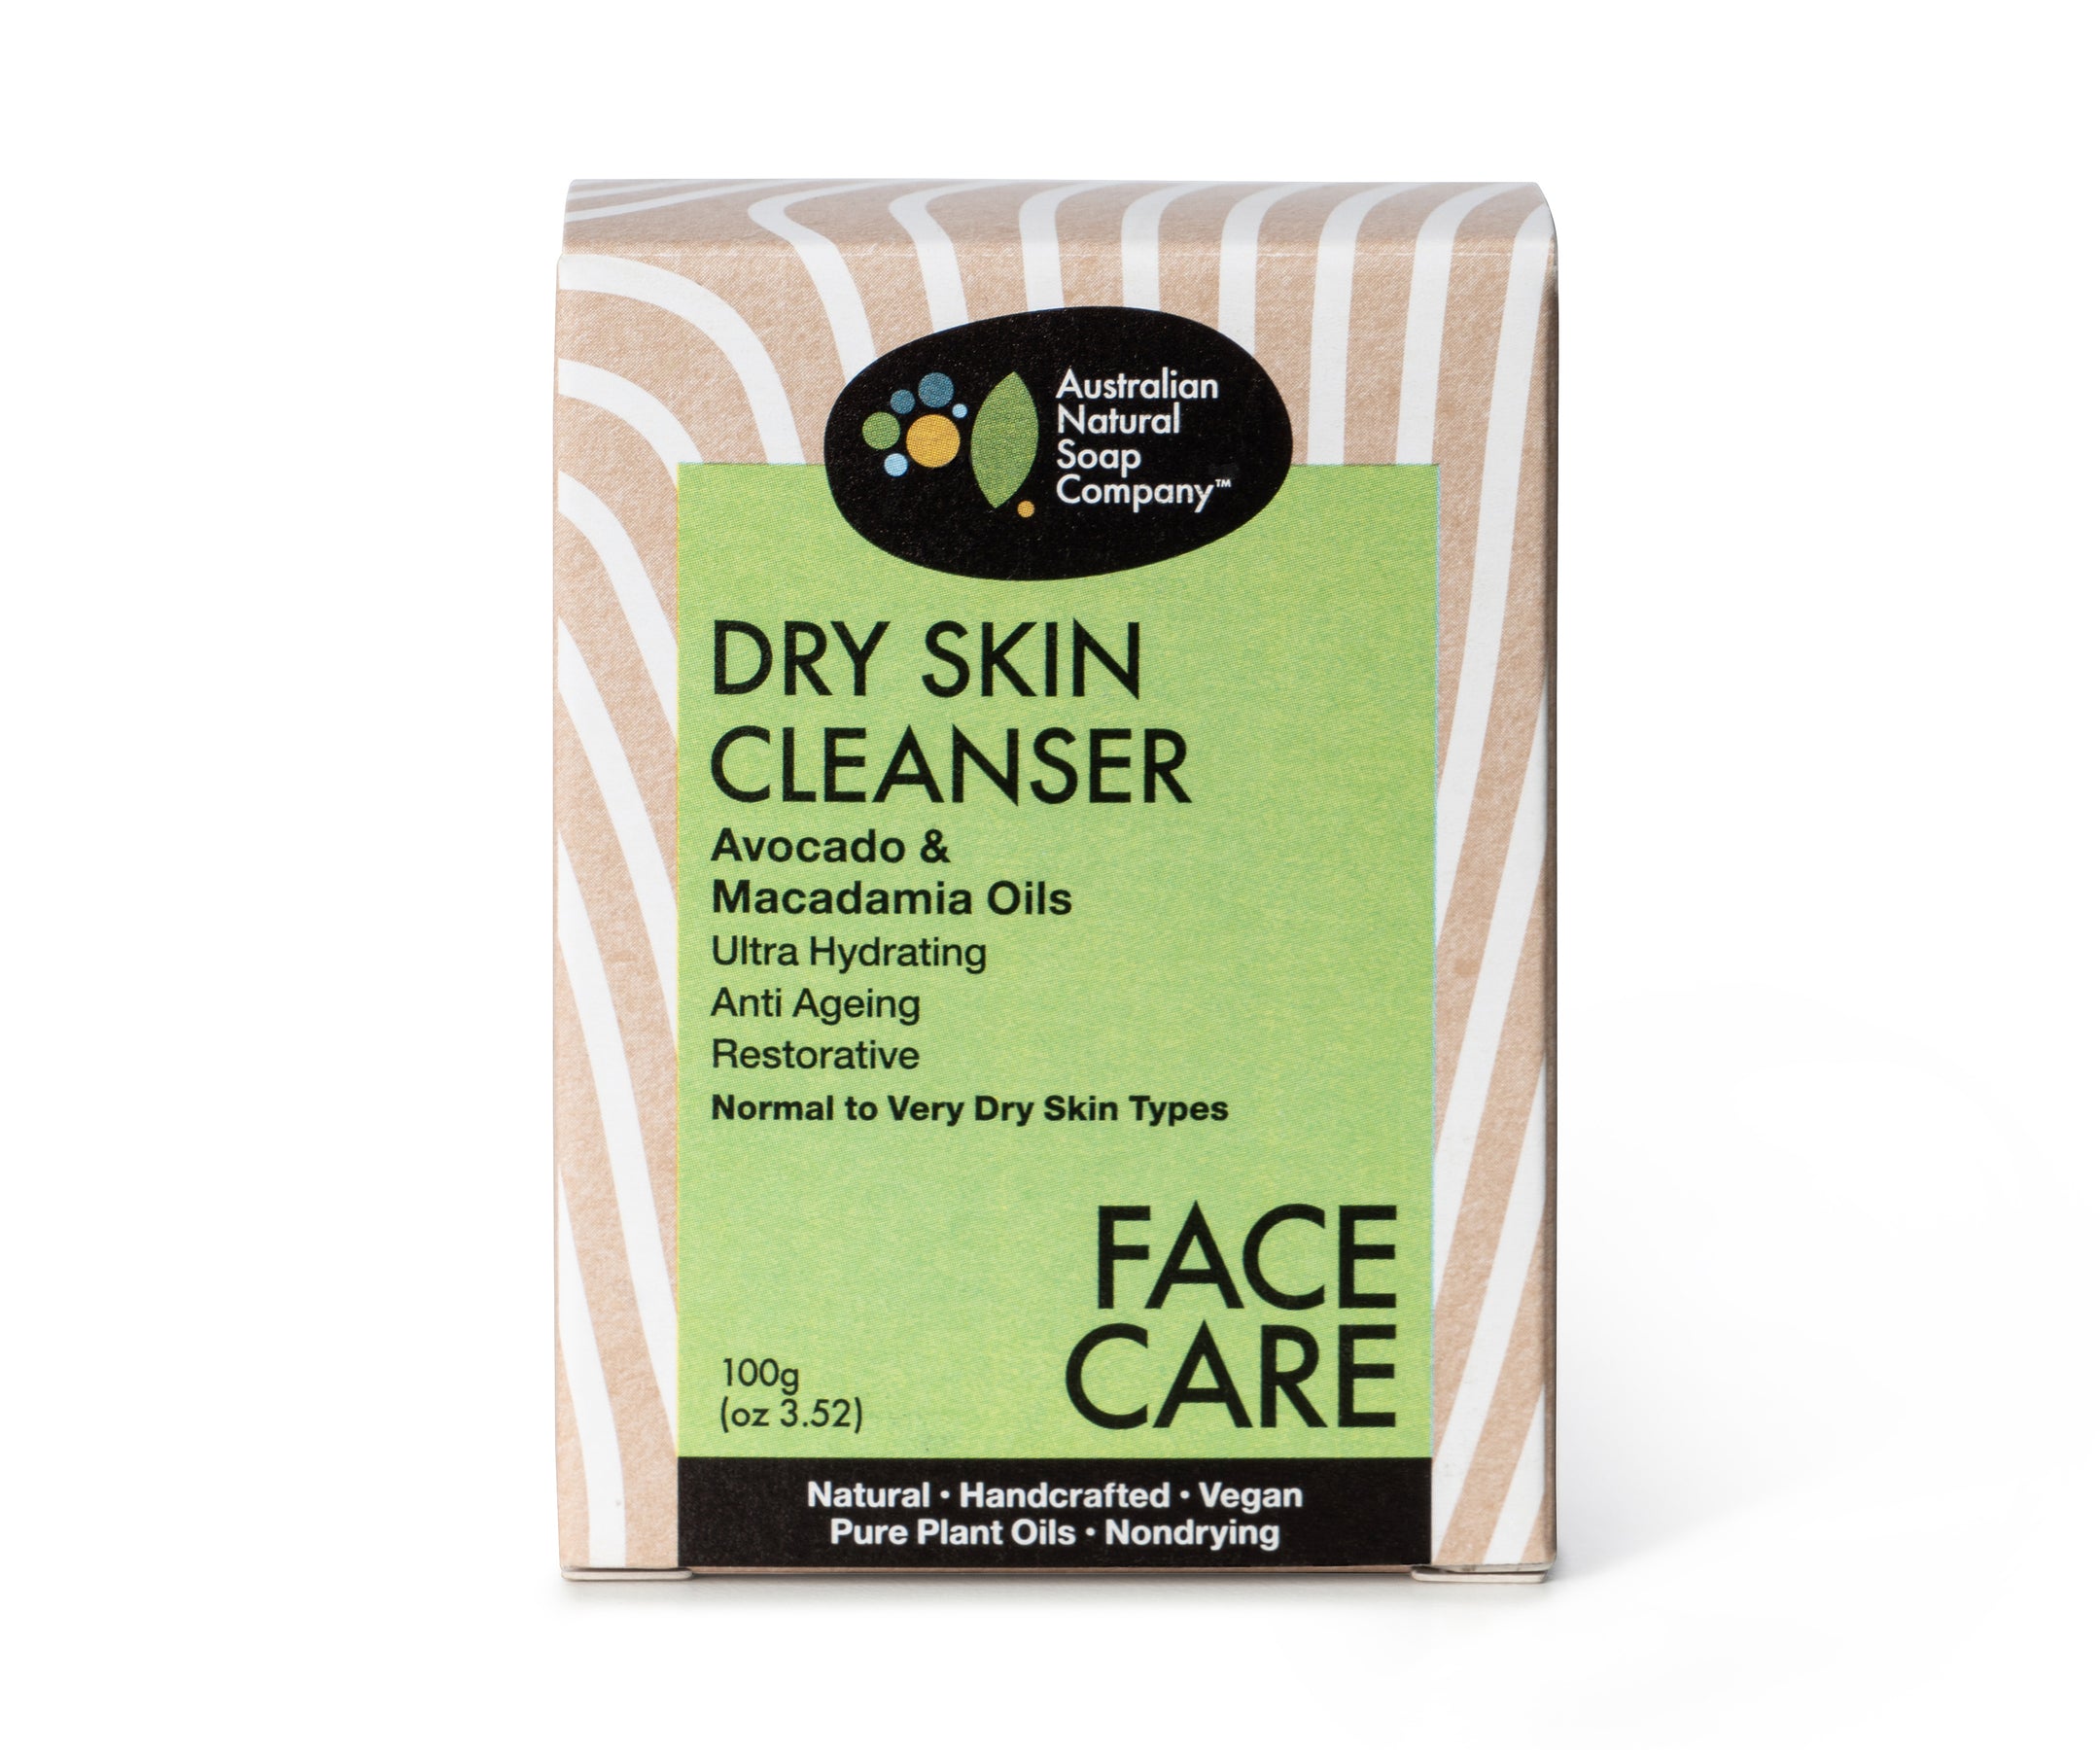 Australian Natural Soap Company - Face Cleanser - Dry Skin (100g)